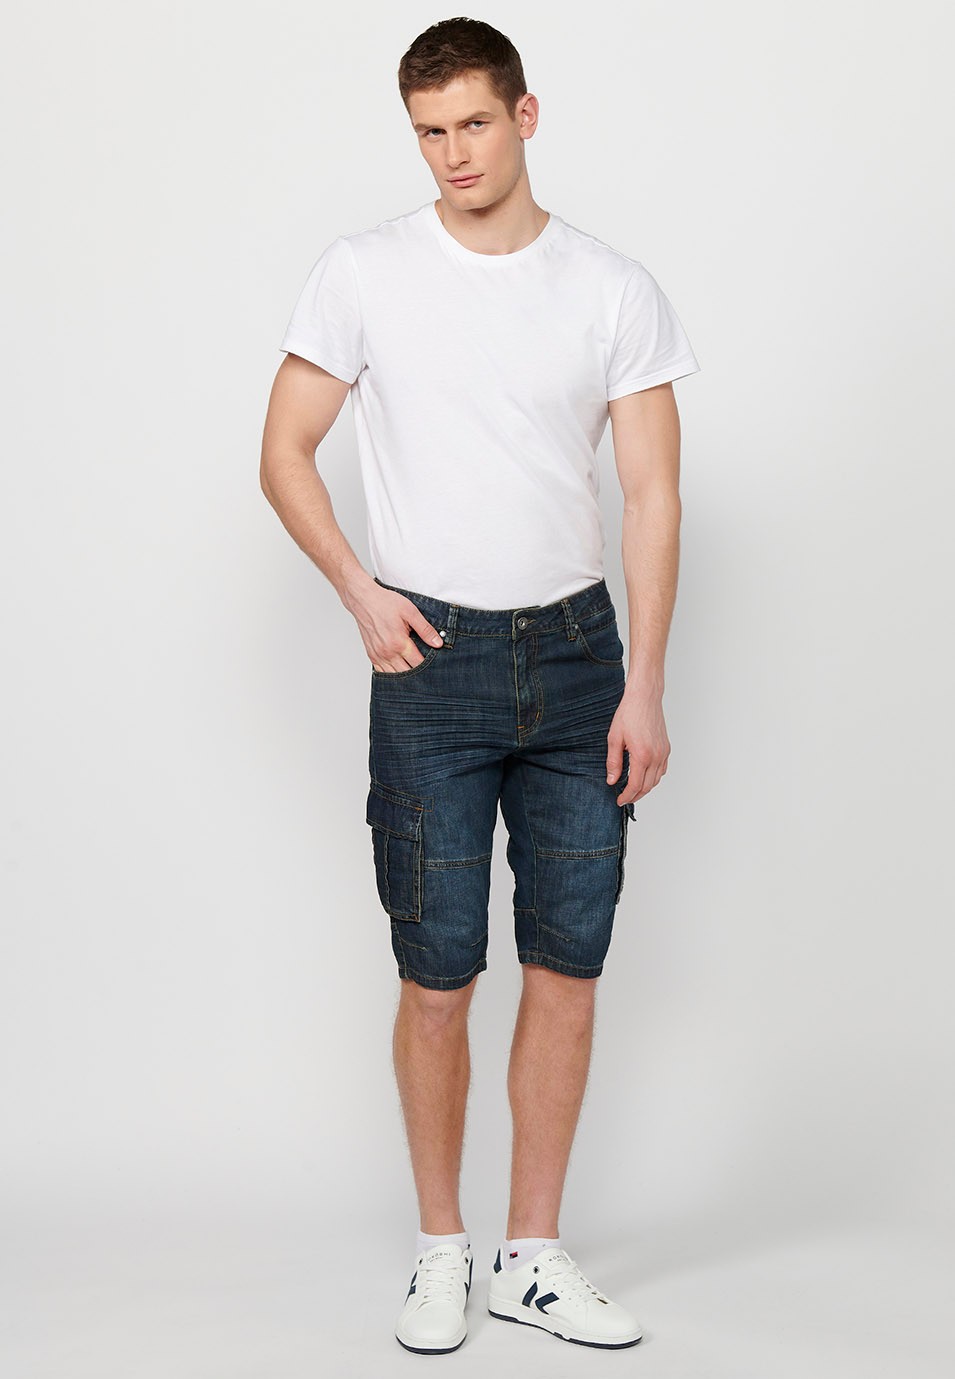 Cotton Pirate Denim Bermuda Shorts with Side Pockets and Front Closure with Zipper and Button in Blue for Men